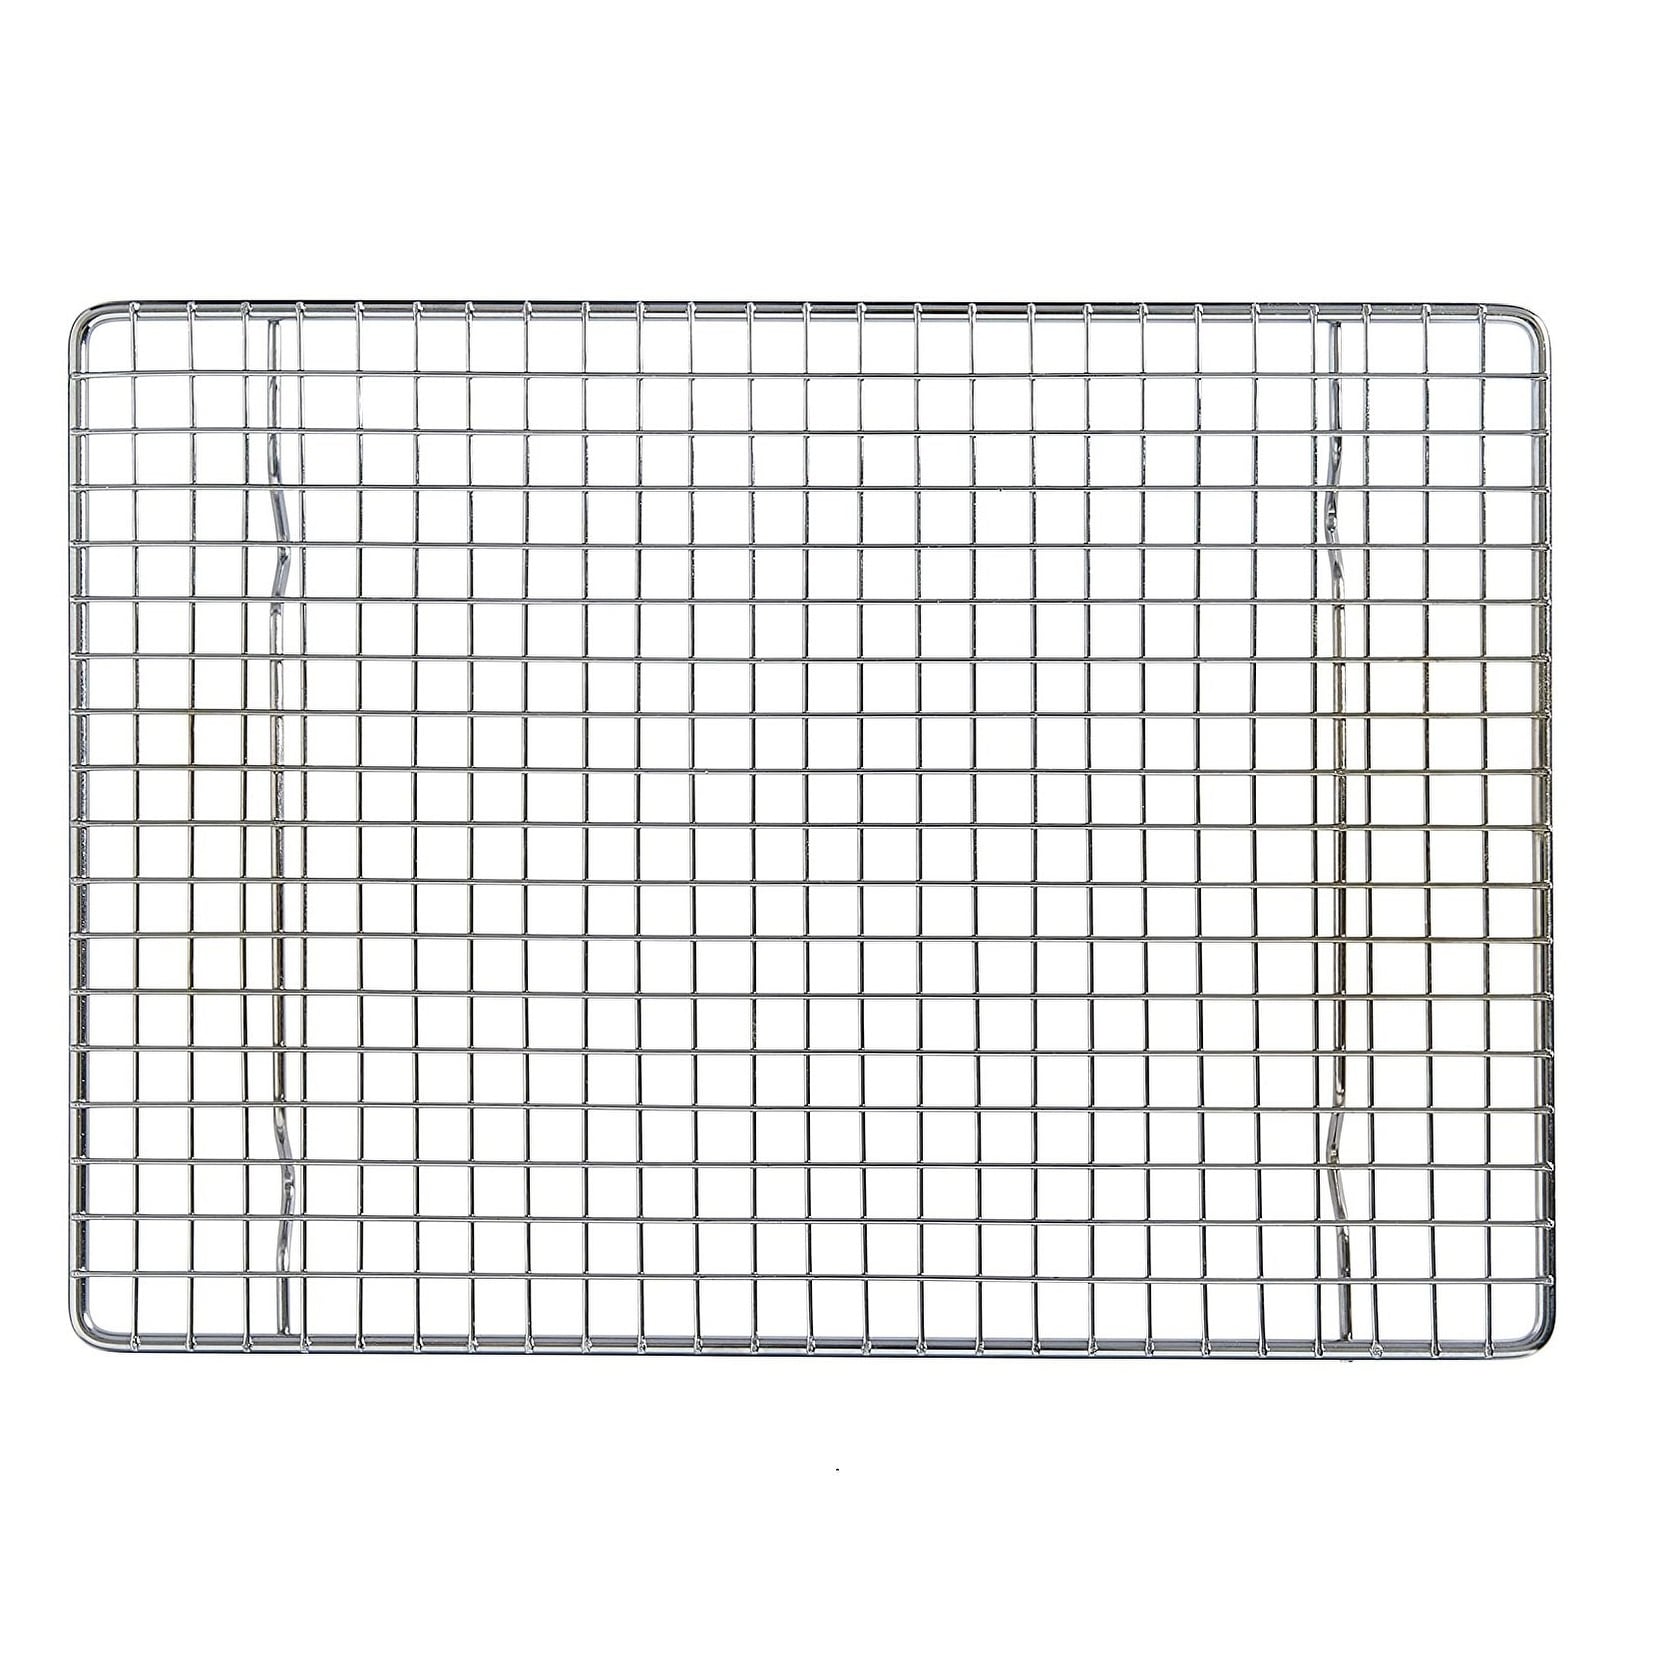 https://ak1.ostkcdn.com/images/products/is/images/direct/a6ceb2c30944e48fa3bd2a82d741212bd85cdfb4/Mrs-Anderson%27s-Baking-Quarter-Sheet-Cooling-Rack---8.5%22-x-12%22---Cool-Cookies%2C-Bread%2C-Cakes.jpg